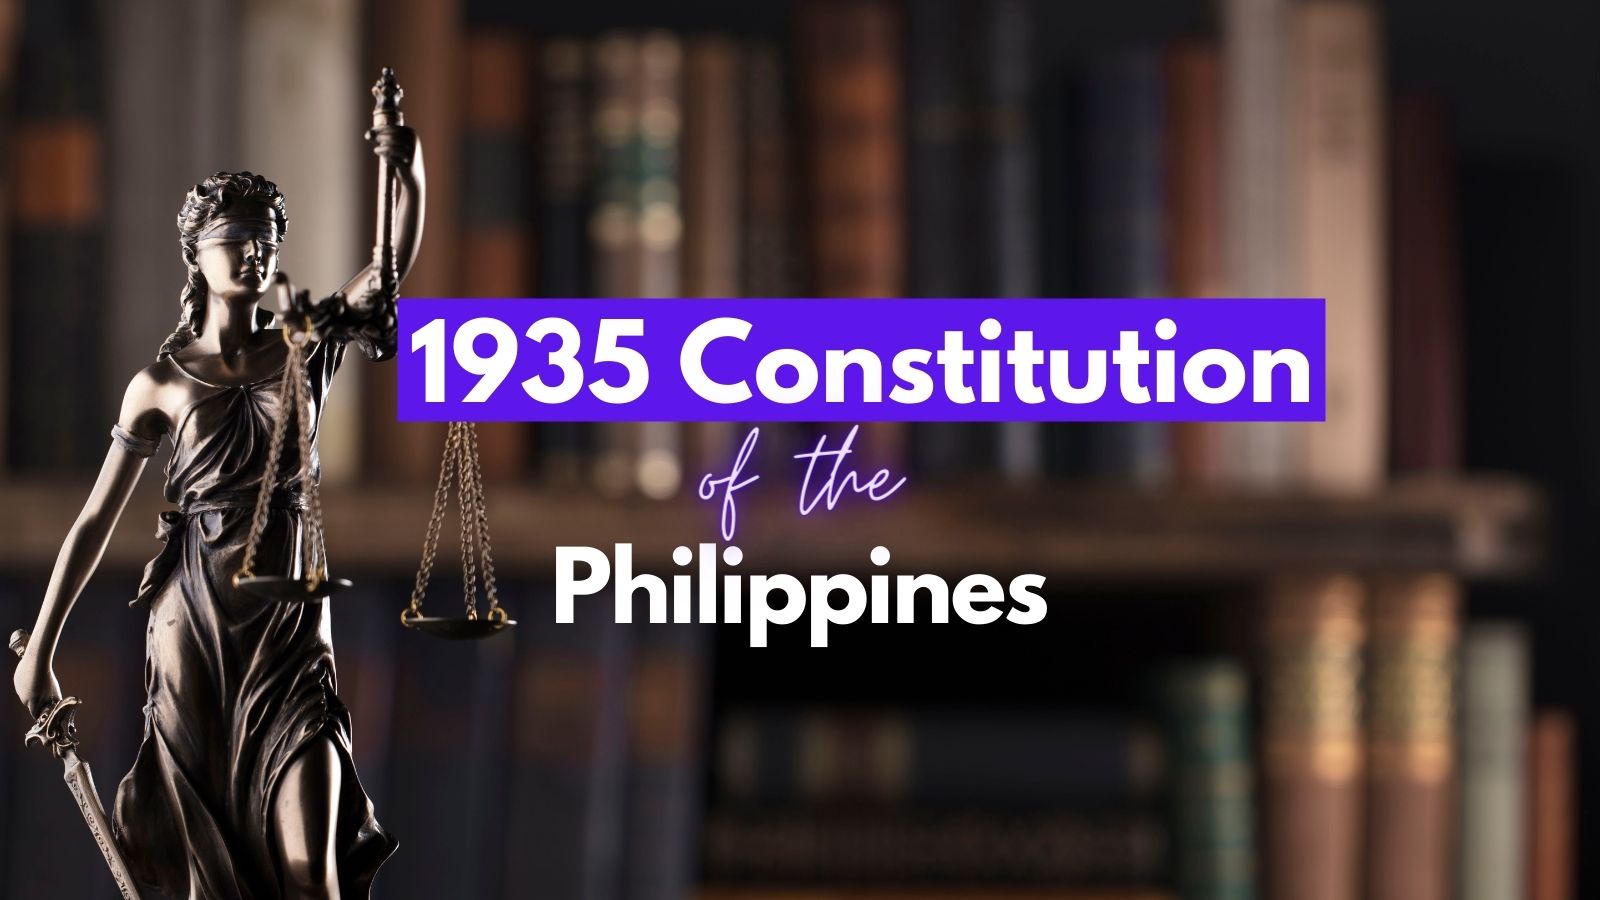 1935 Constitution of the Philippines Tagalog Version